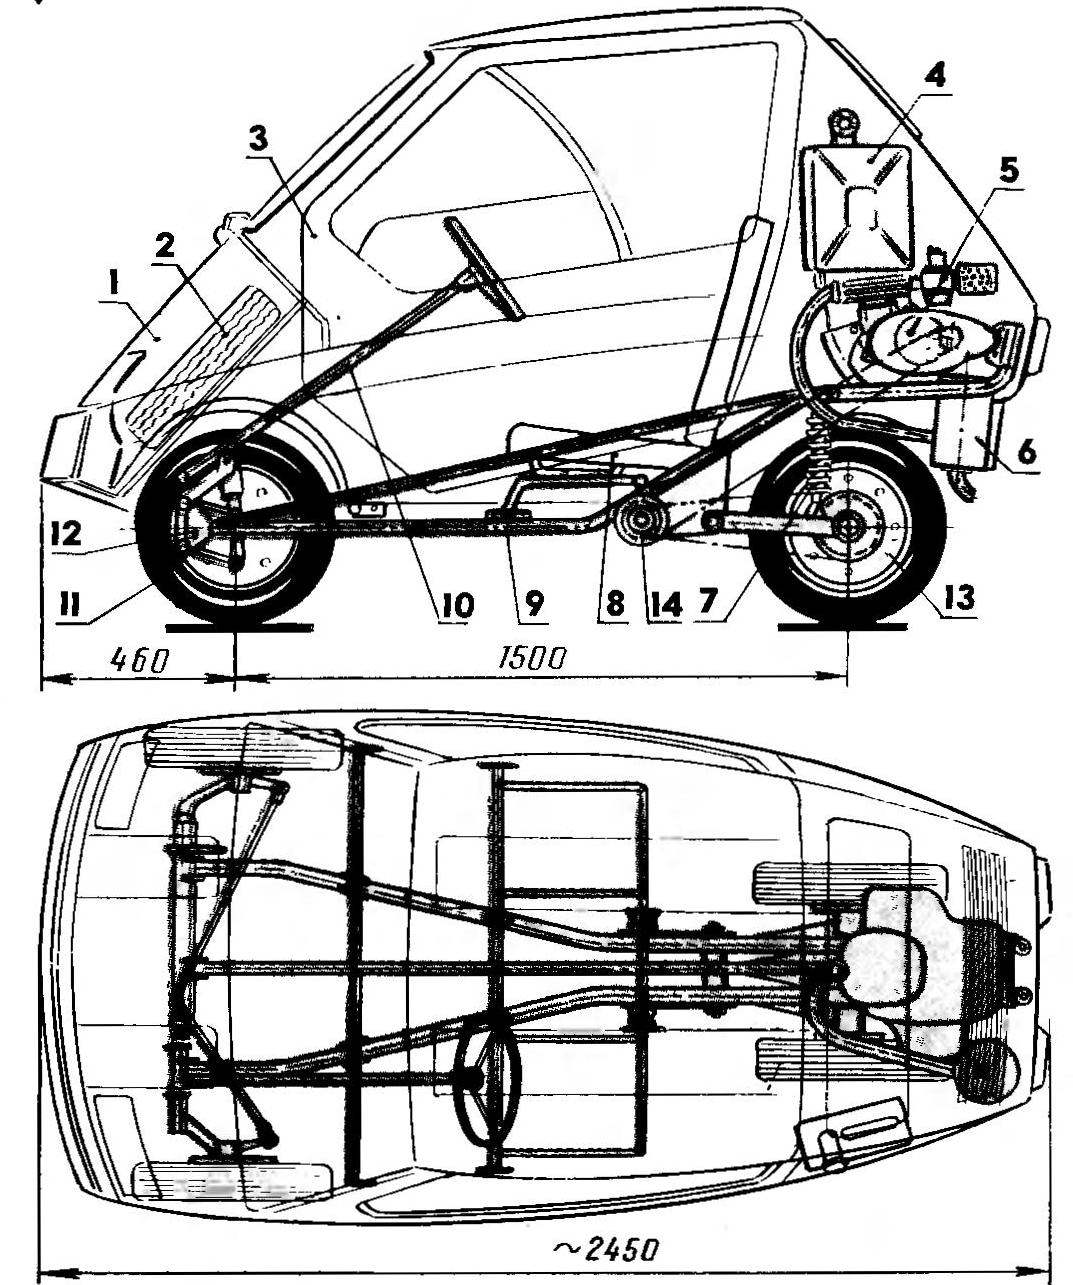 Fig. 2. The layout of the little micro-car